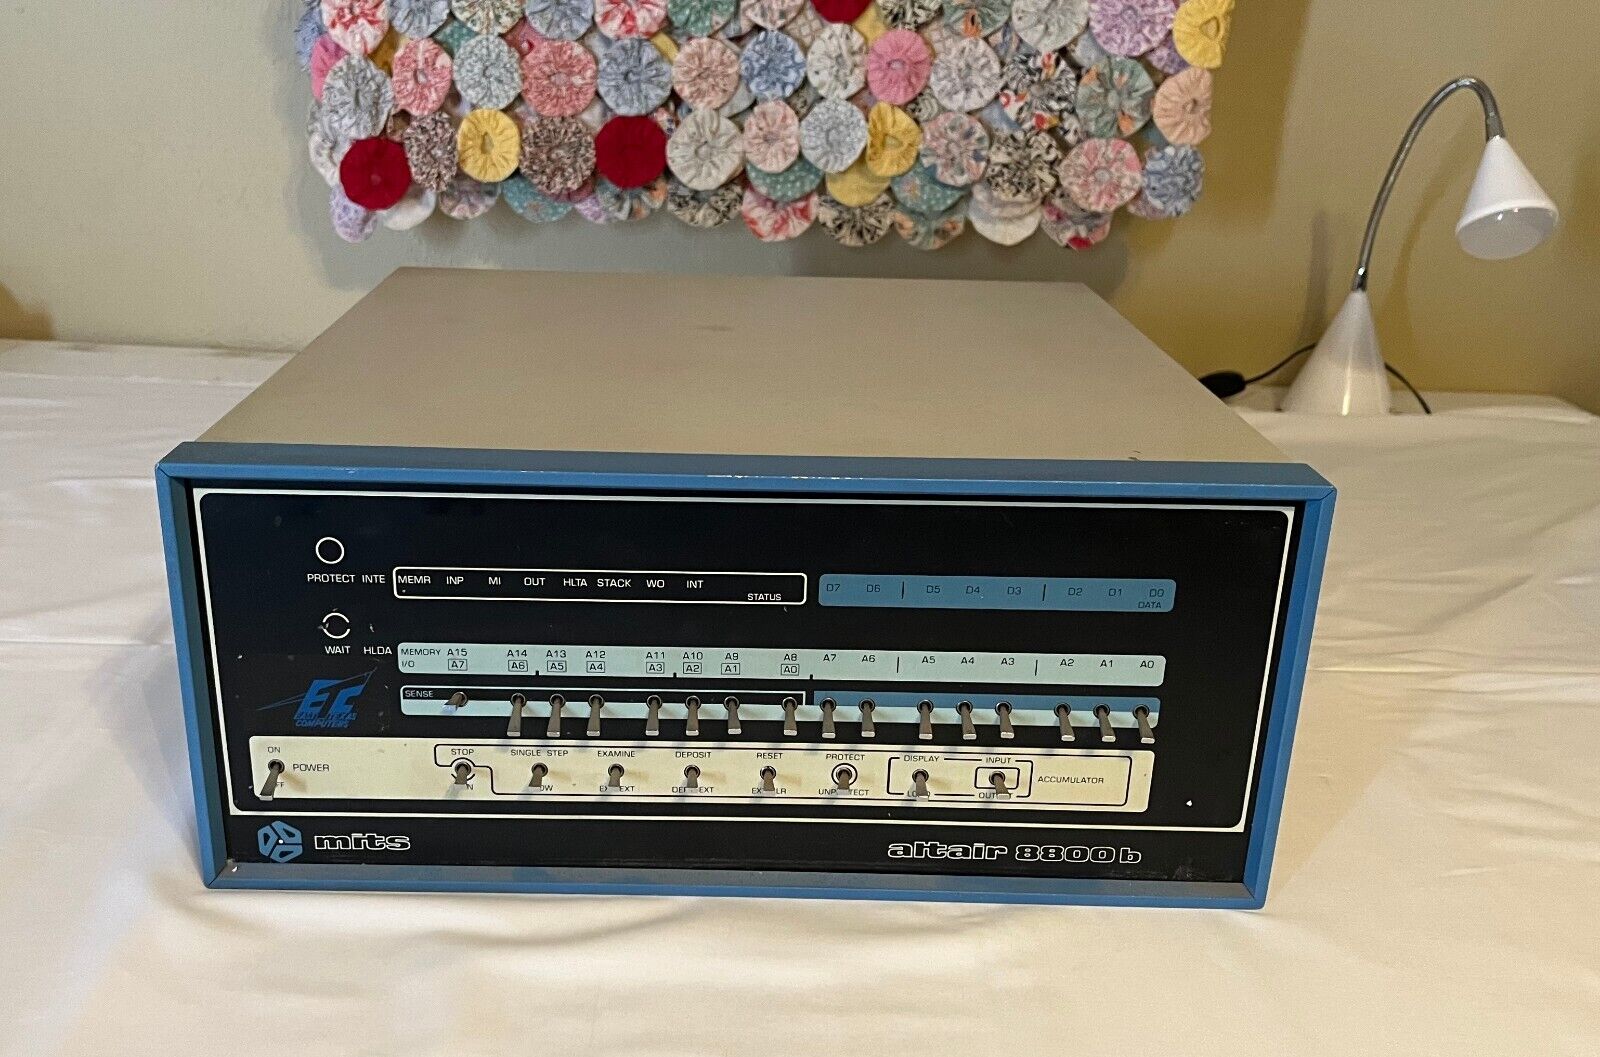 Altair 8800B computer with 8K Static Memory - Used